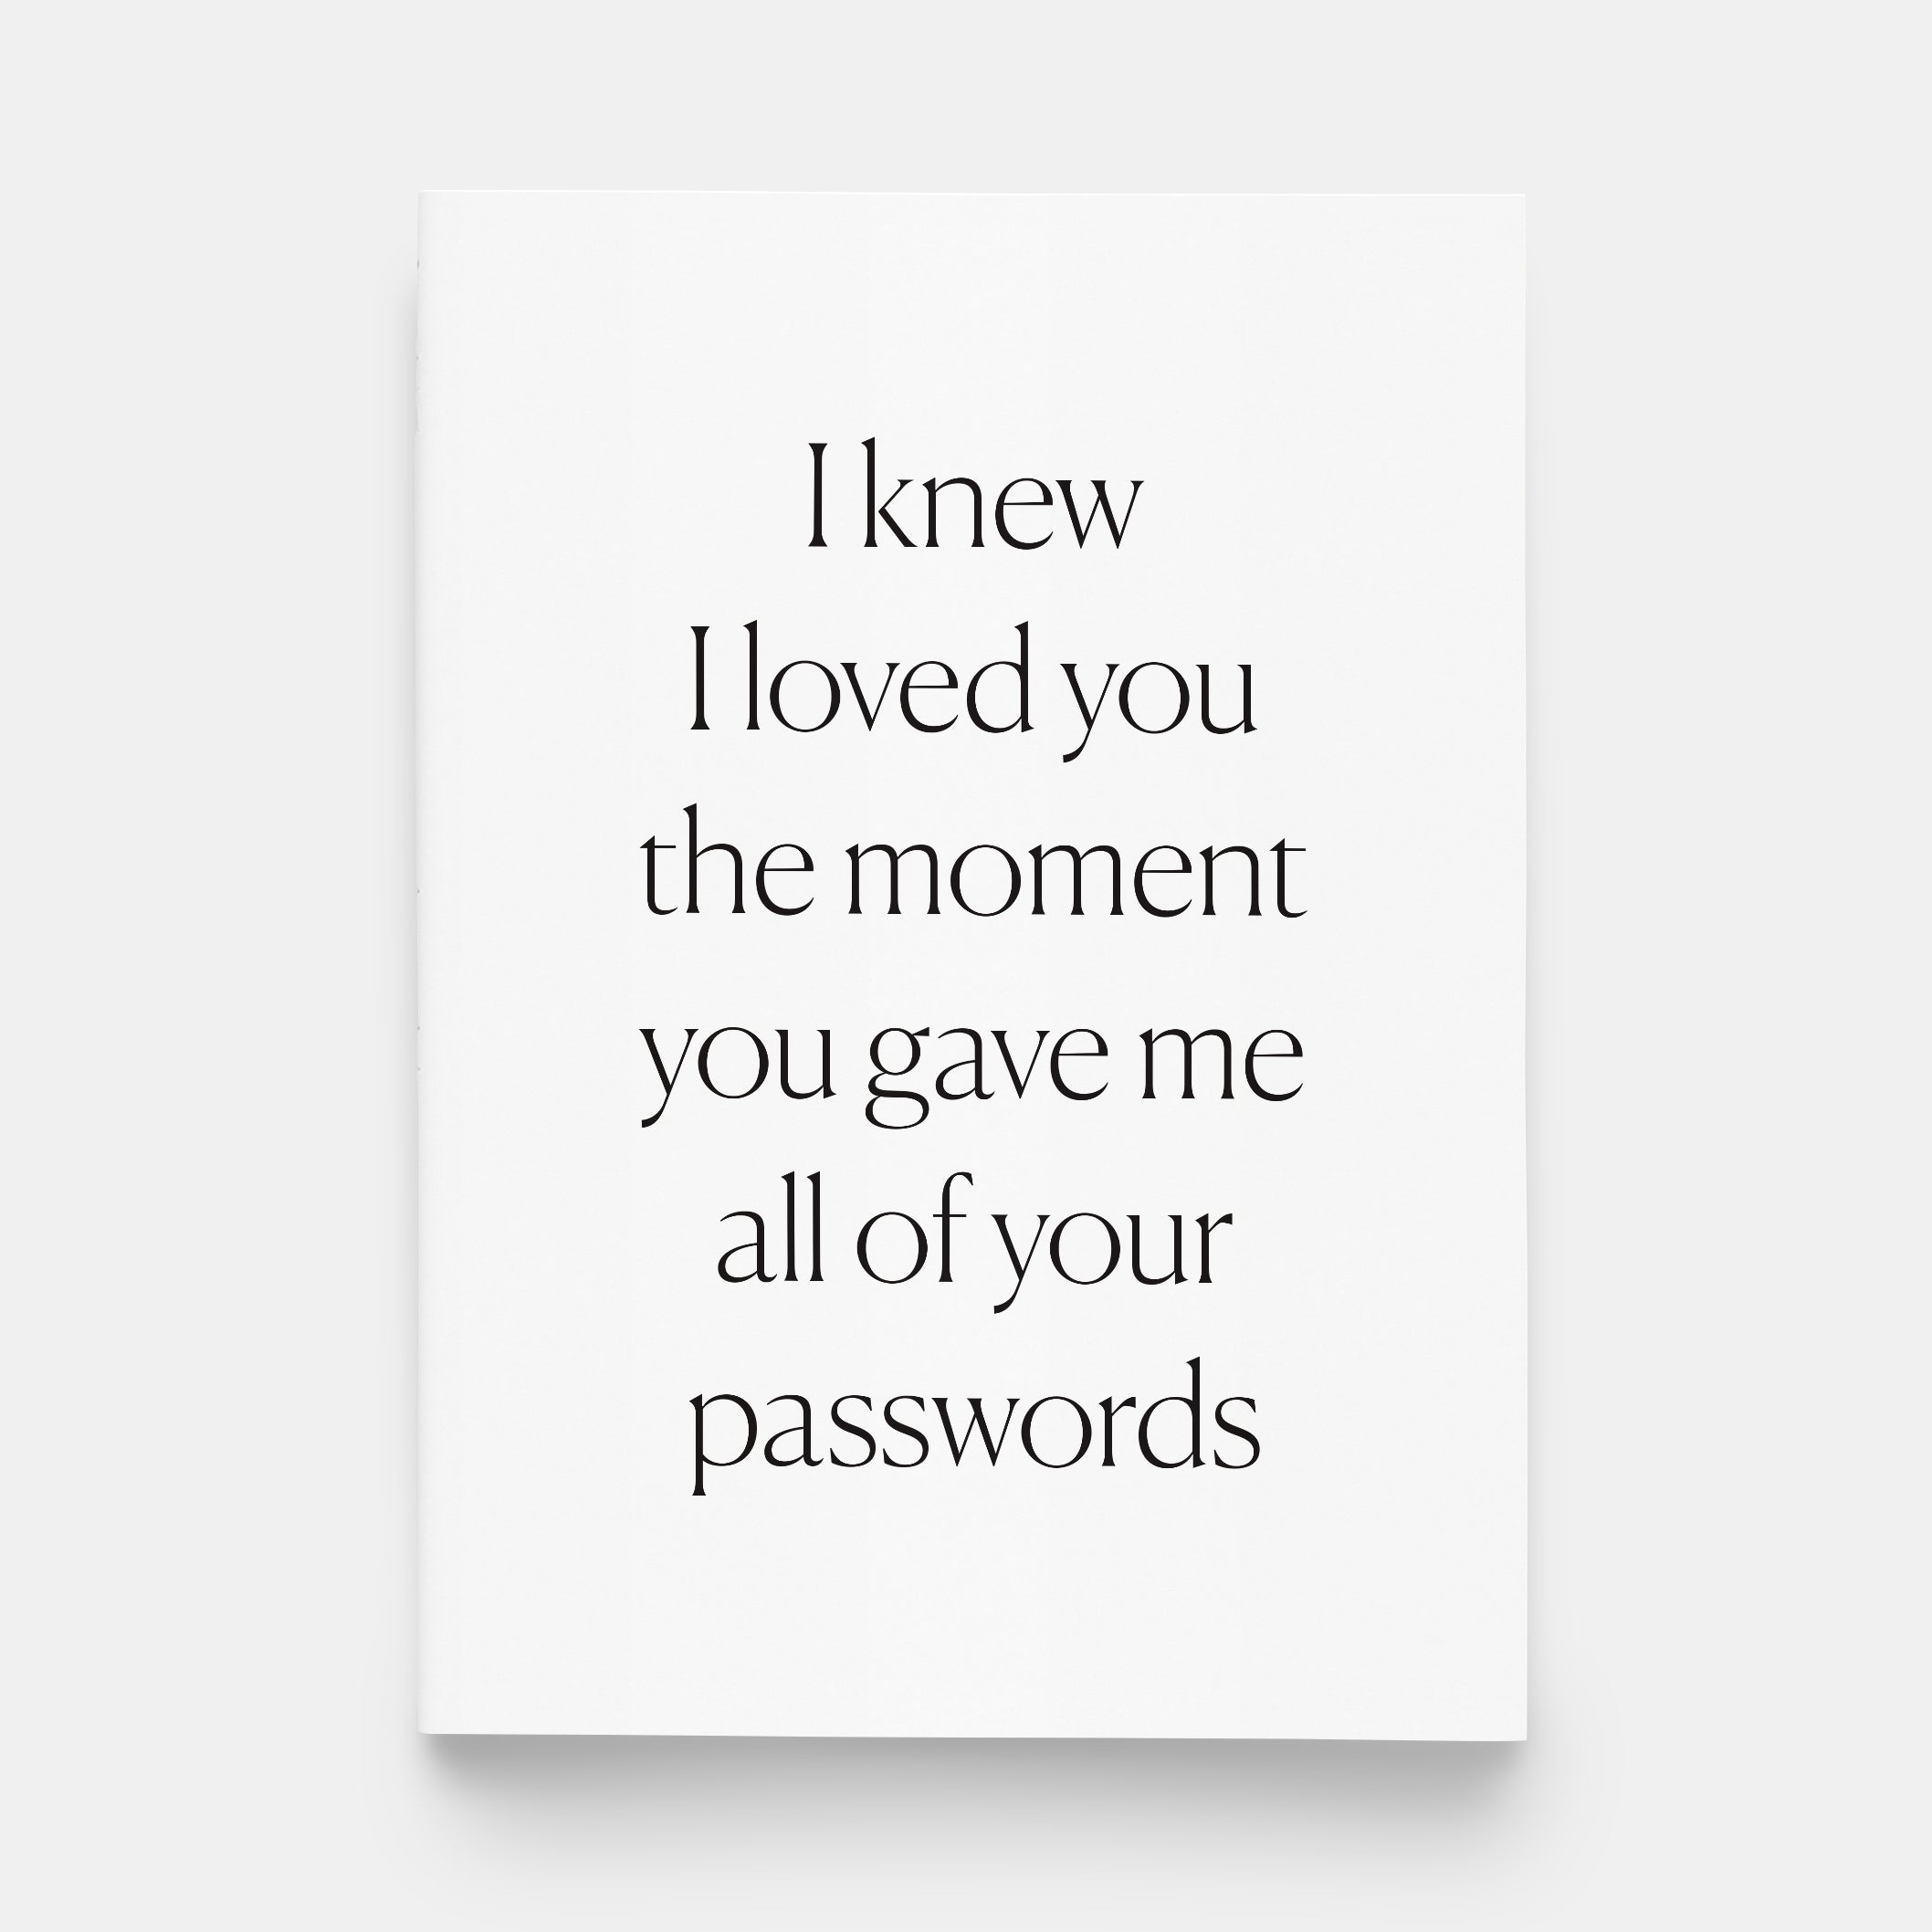 Paper and Stuff Greeting Card - Gave Me Your Passwords